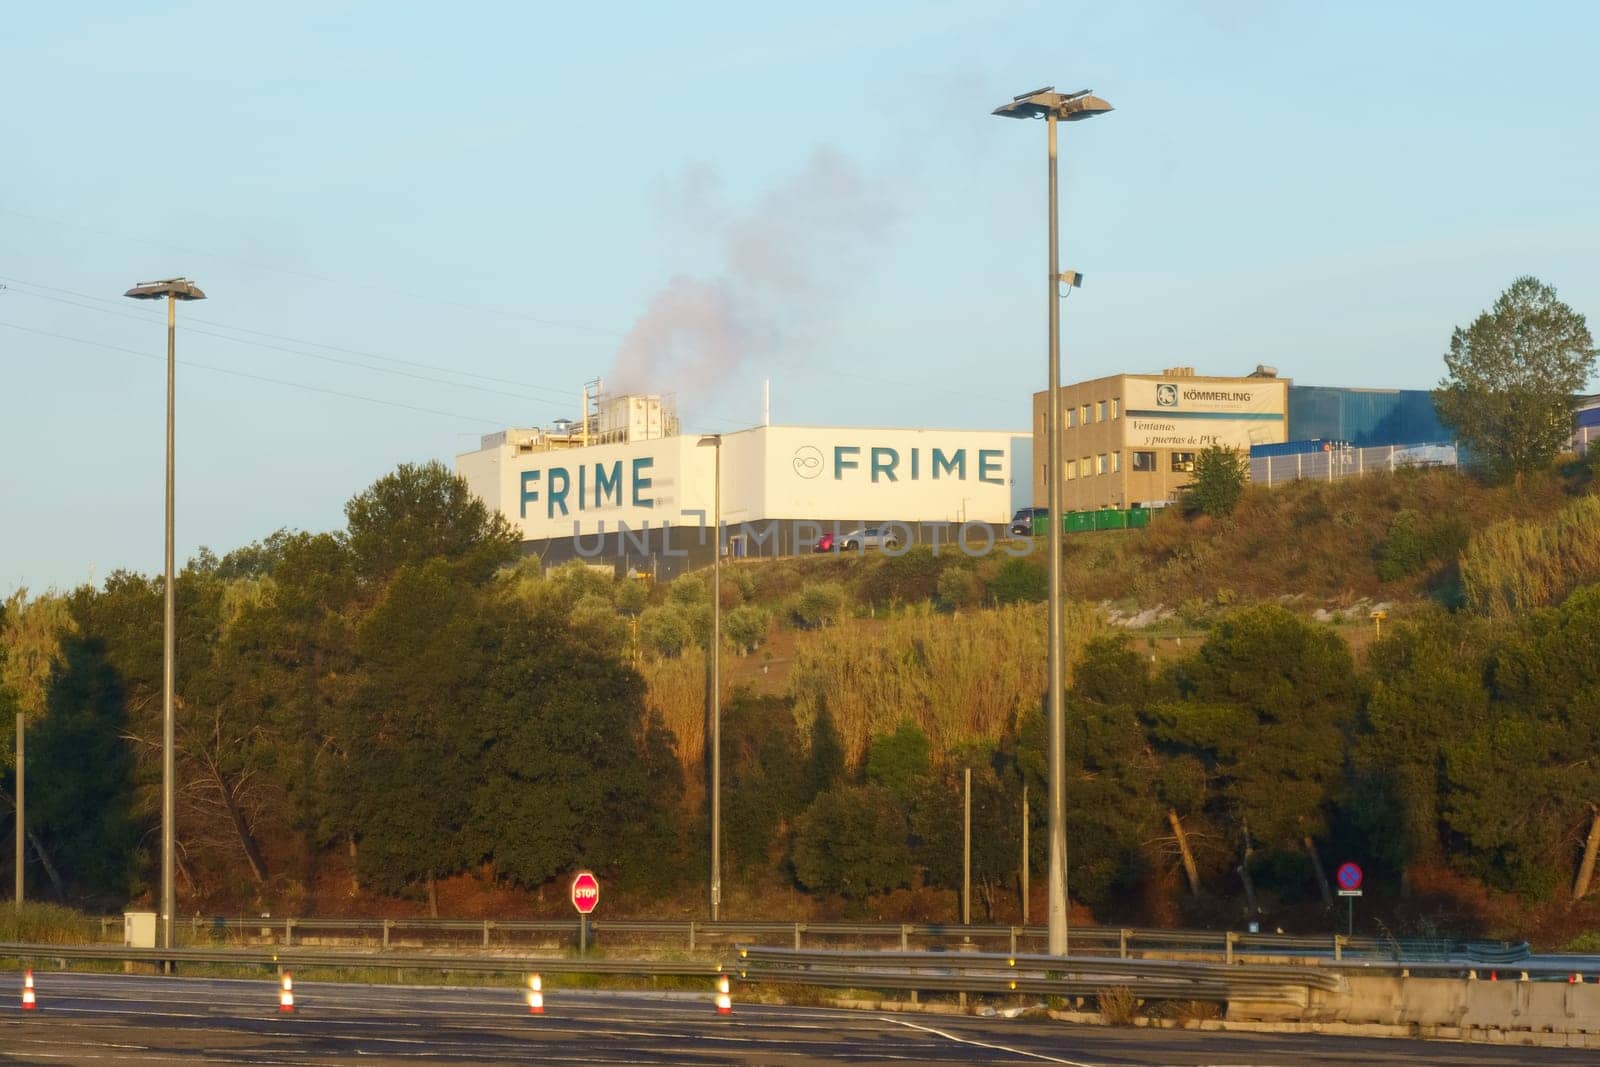 Barcelona, Spain - May 15, 2023: Smoke emerges from the FRIME factory behind a tree line as the sun sets, viewed from an empty highway.